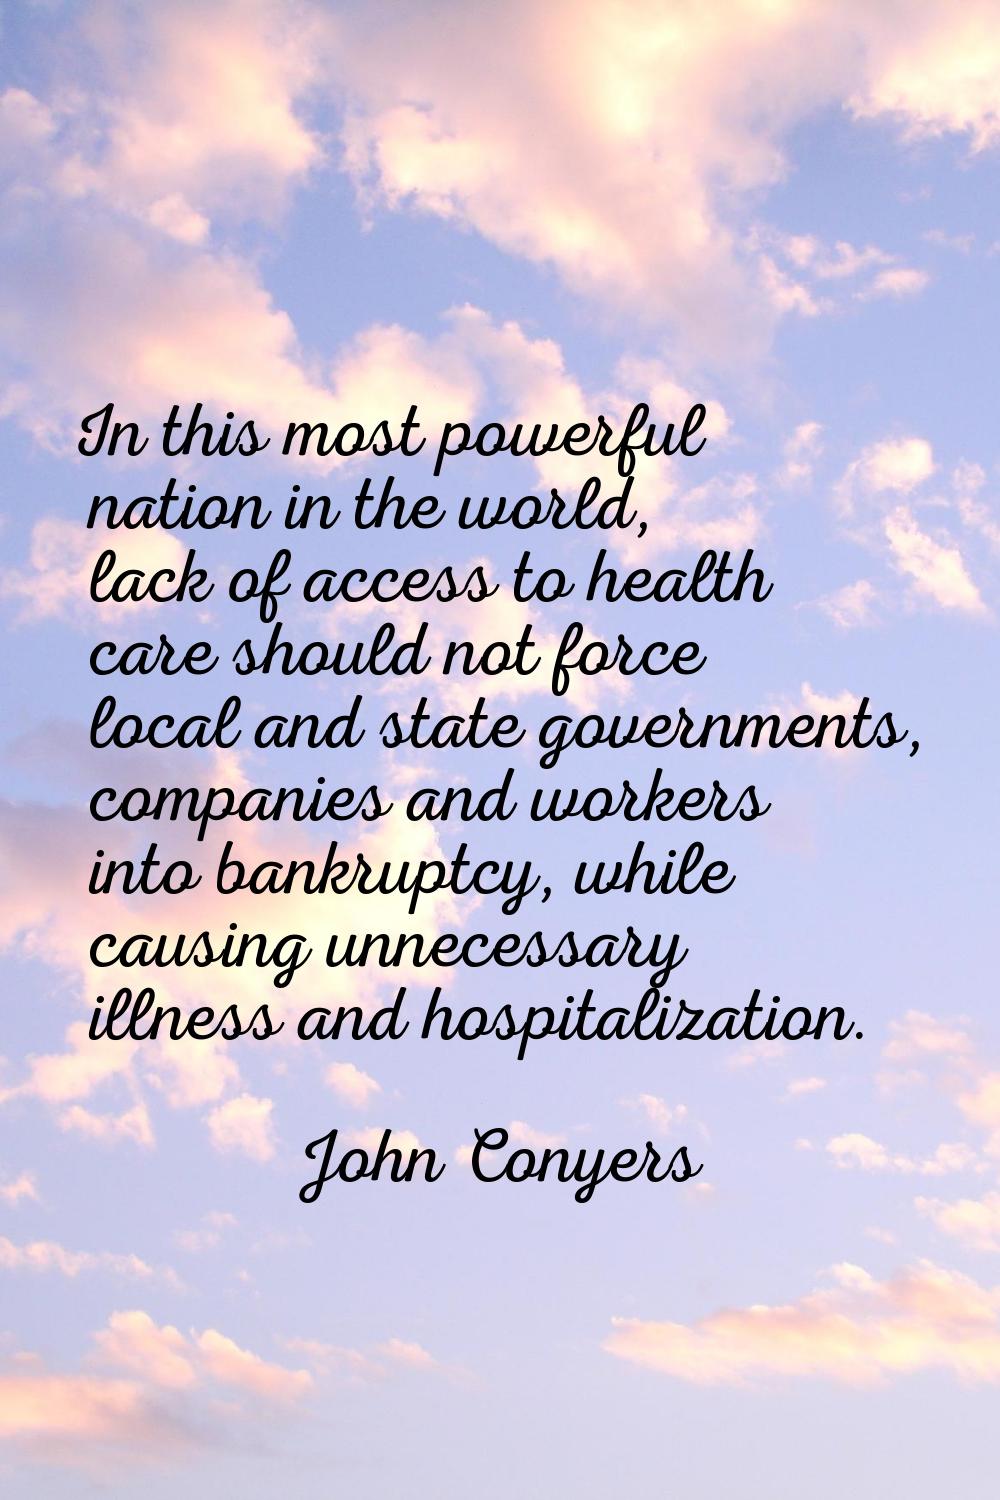 In this most powerful nation in the world, lack of access to health care should not force local and